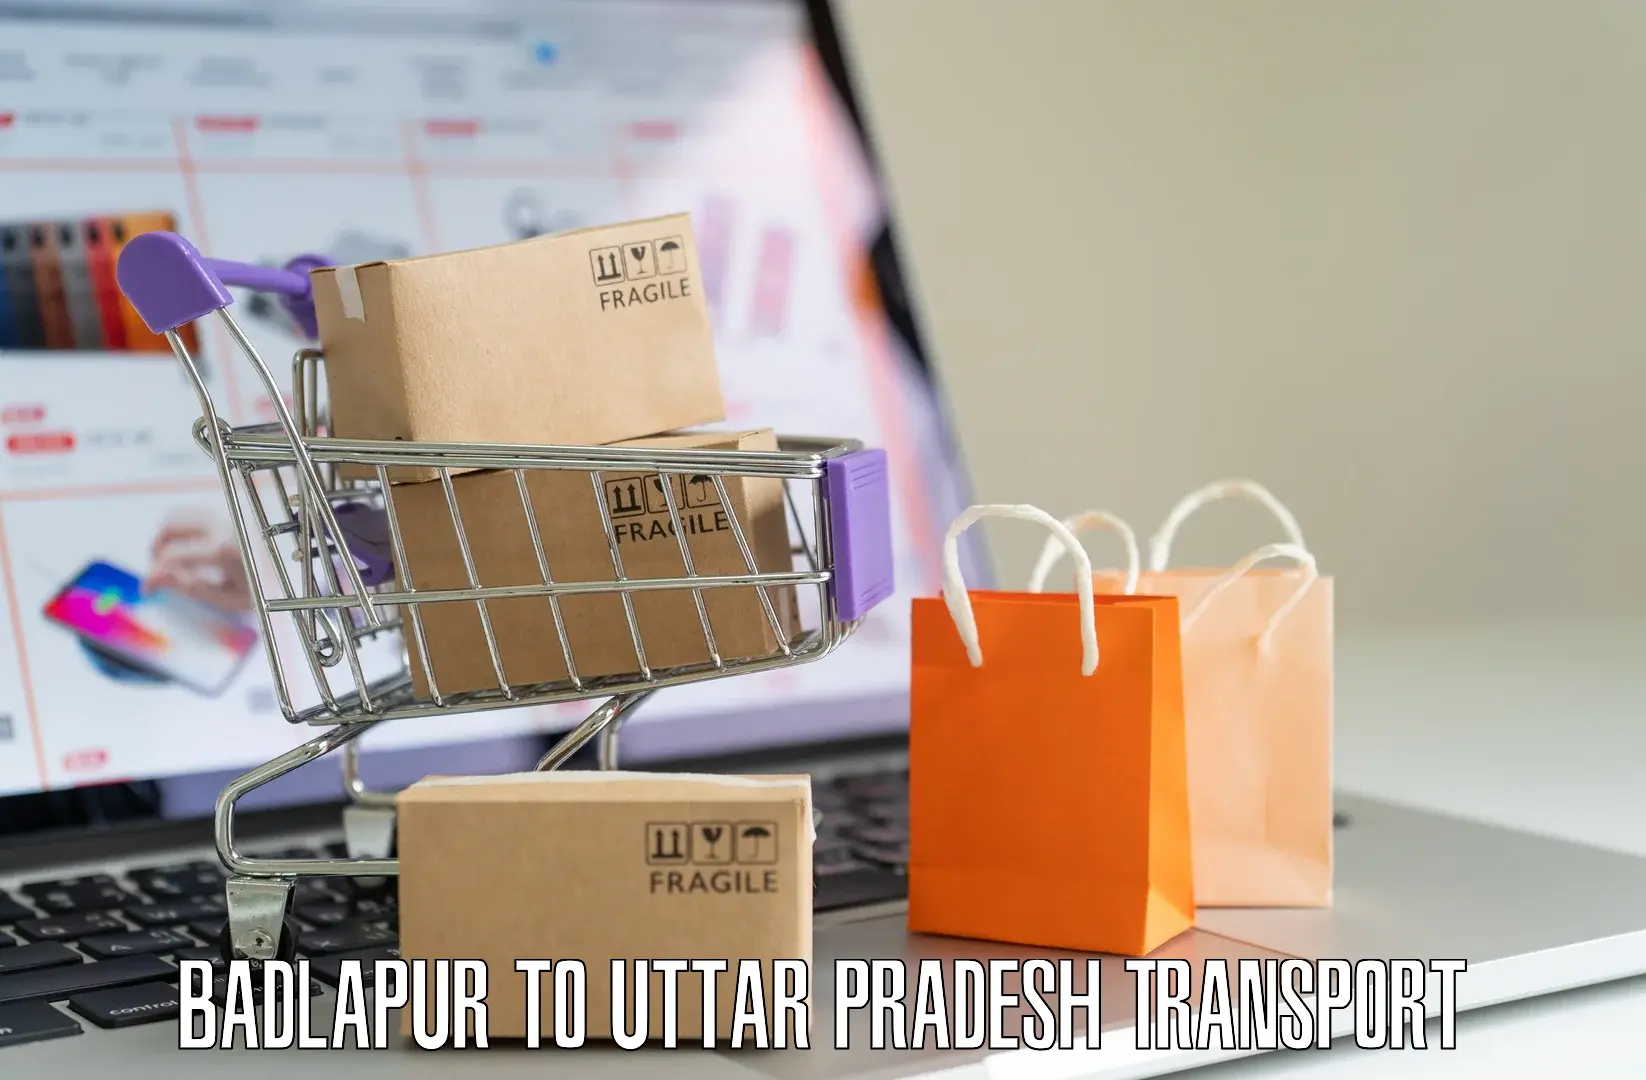 Pick up transport service Badlapur to Sultanpur Avadh